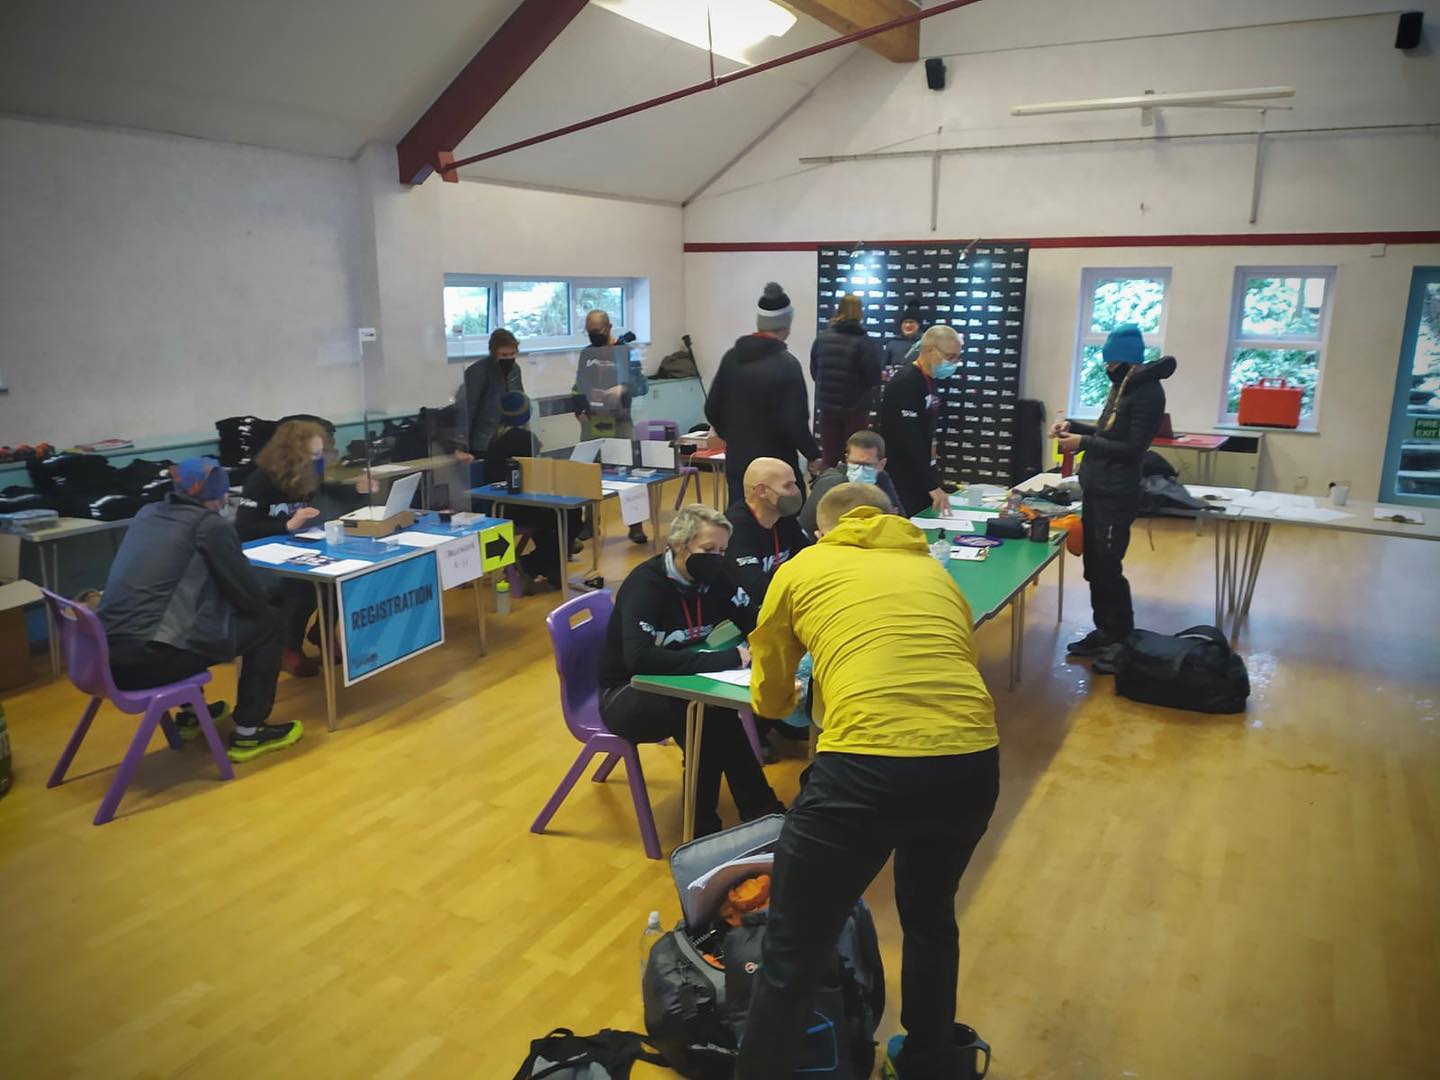 Registration at Montane Spine Race in full flow, complete with authentic heavy snow in Edale

@spinerace 
#montanespinerace 
#montane 
#britainsmostbrutal